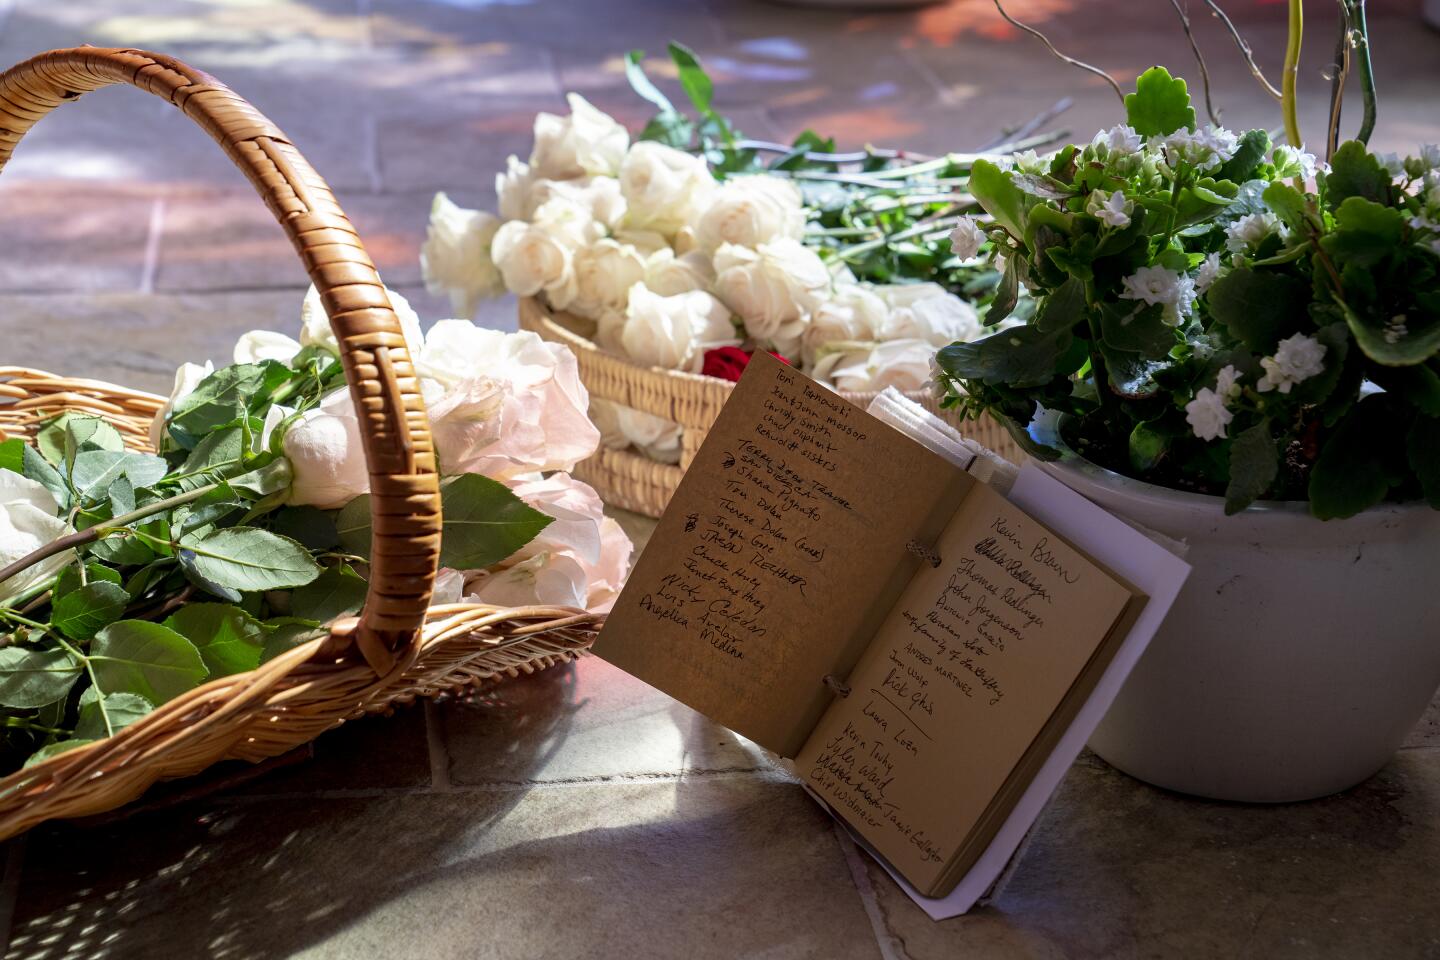 During Mass for Survivors of Suicide Loss at Our Mother of Confidence, about 75 white roses were placed in a basket from families who lost a love one to suicide.